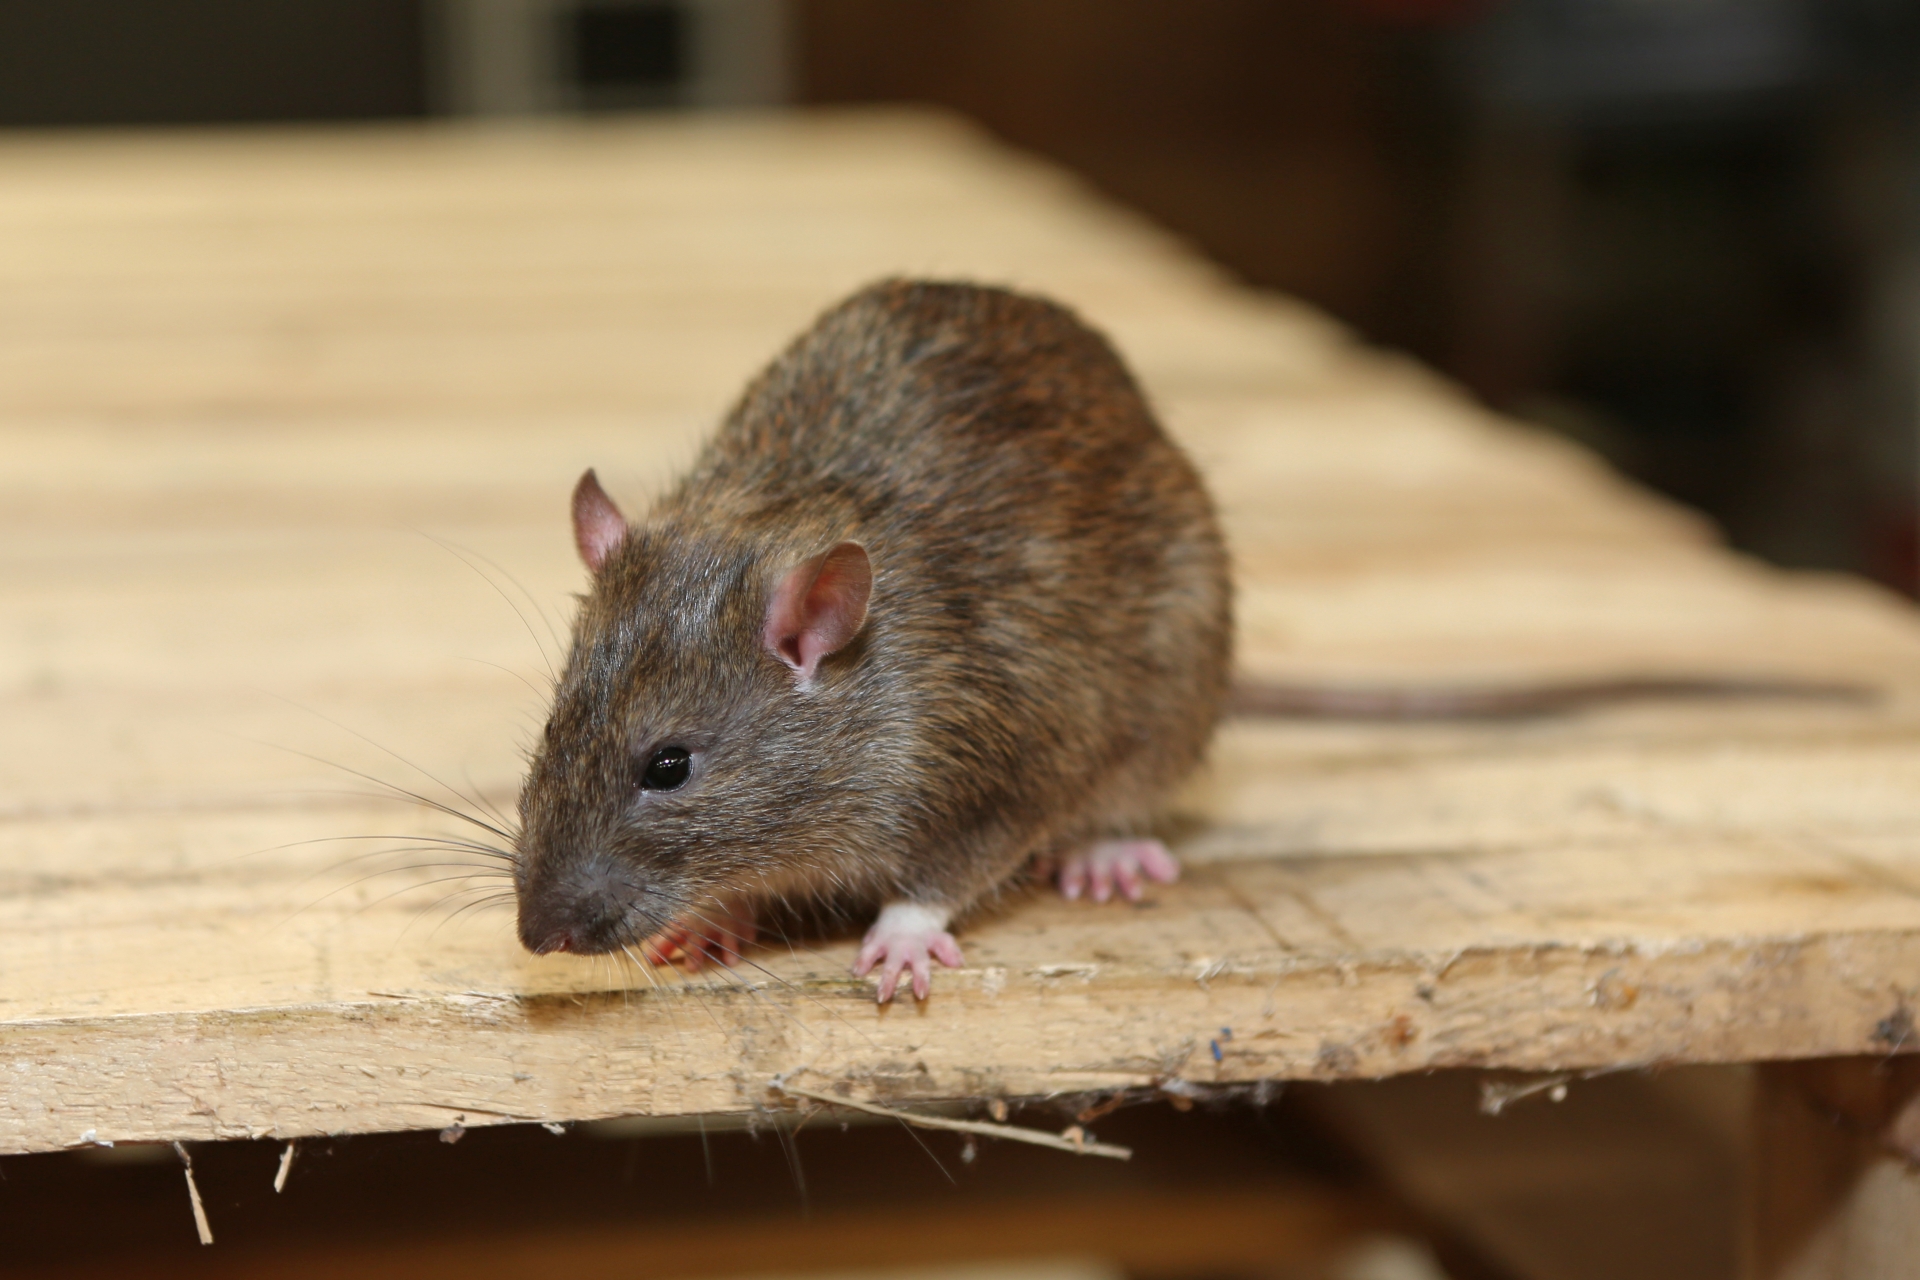 Rat extermination, Pest Control in Oxhey, South Oxhey, WD19. Call Now 020 8166 9746